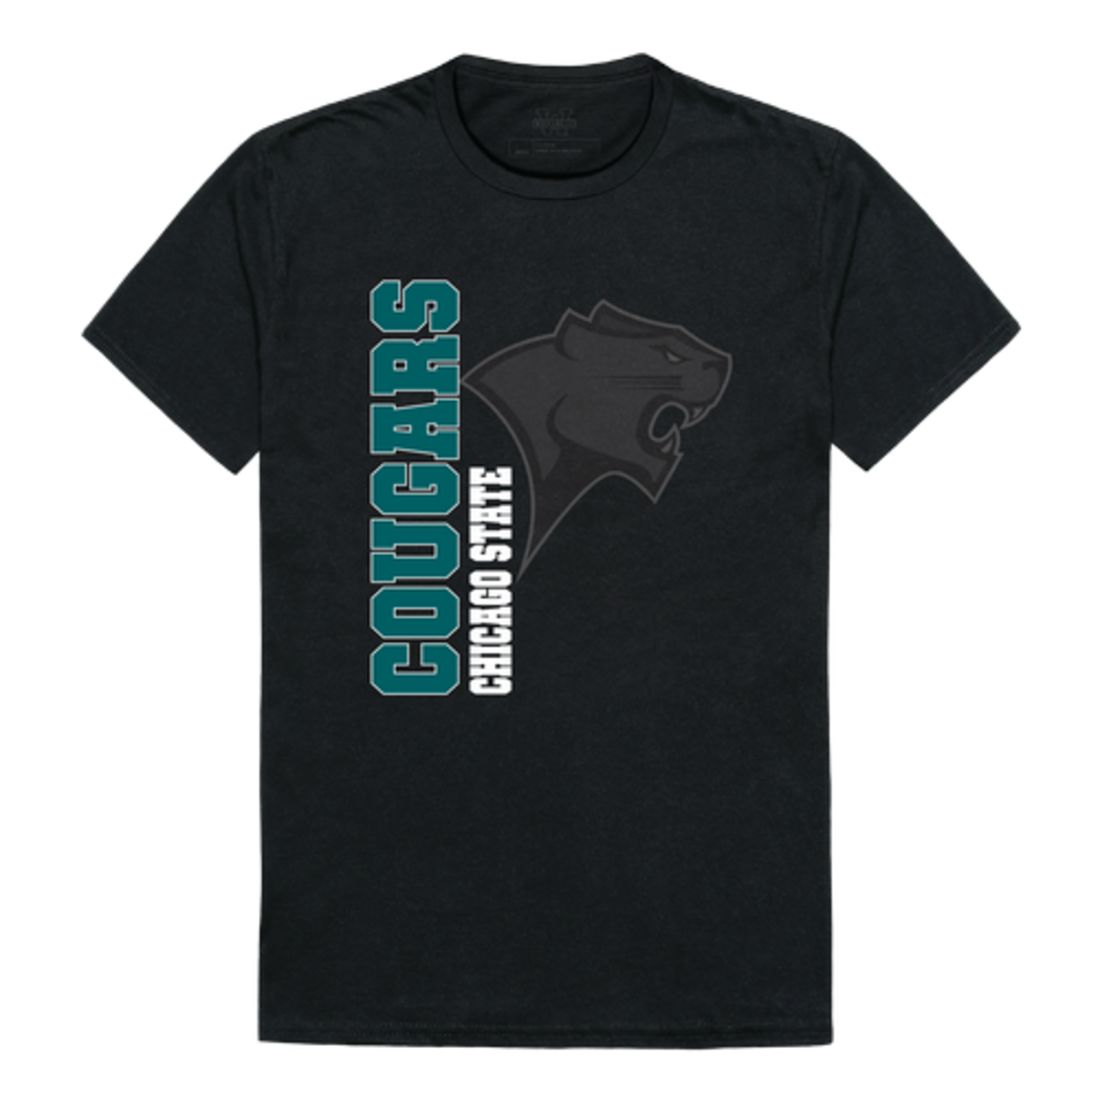 Chicago State University Cougars Ghost T-Shirt Tee